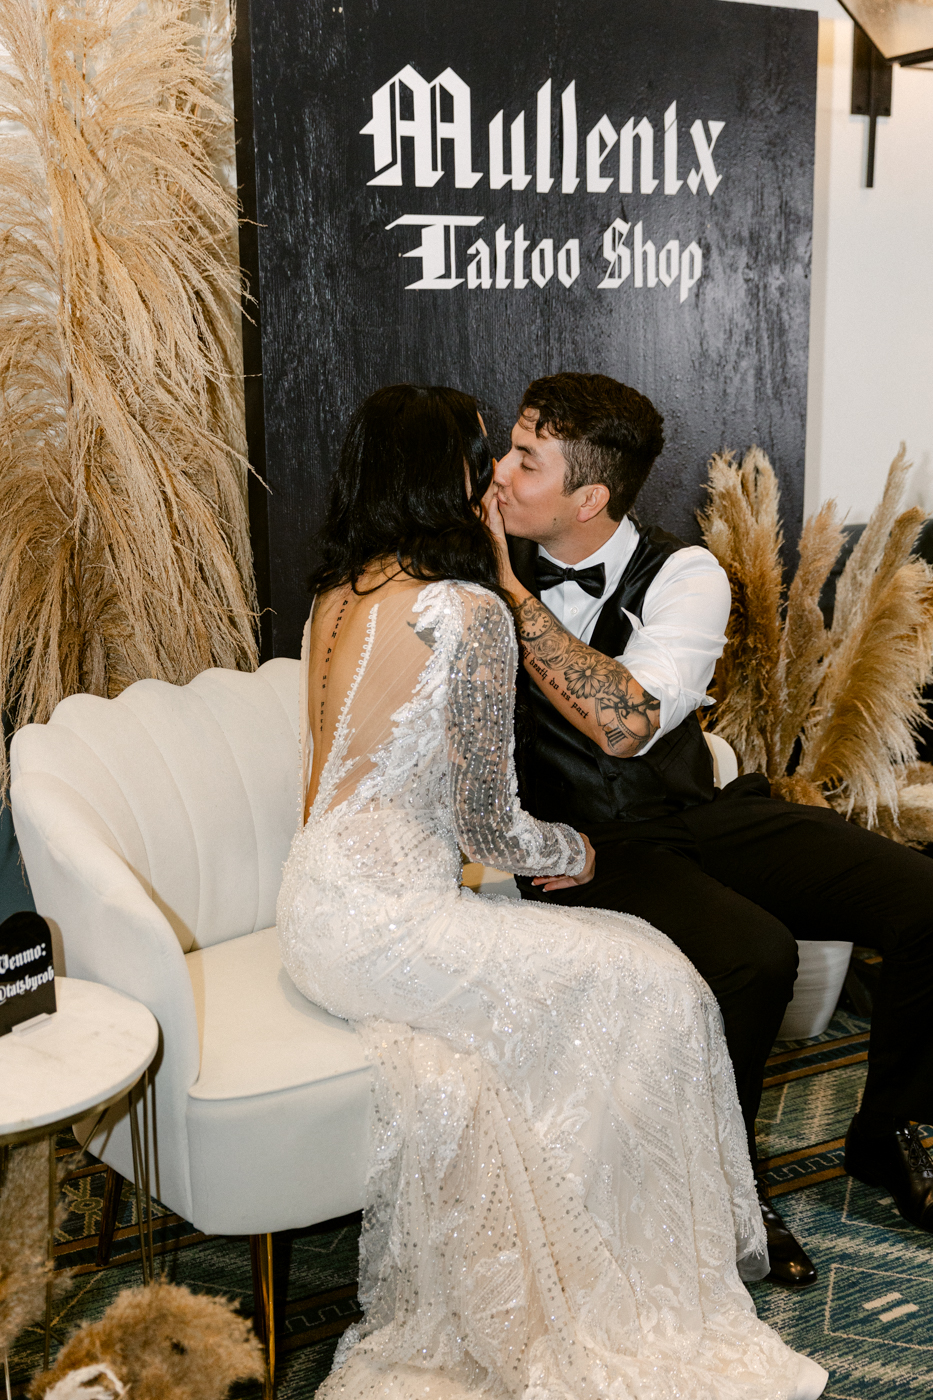 Bride and groom get tattooed on their wedding day.